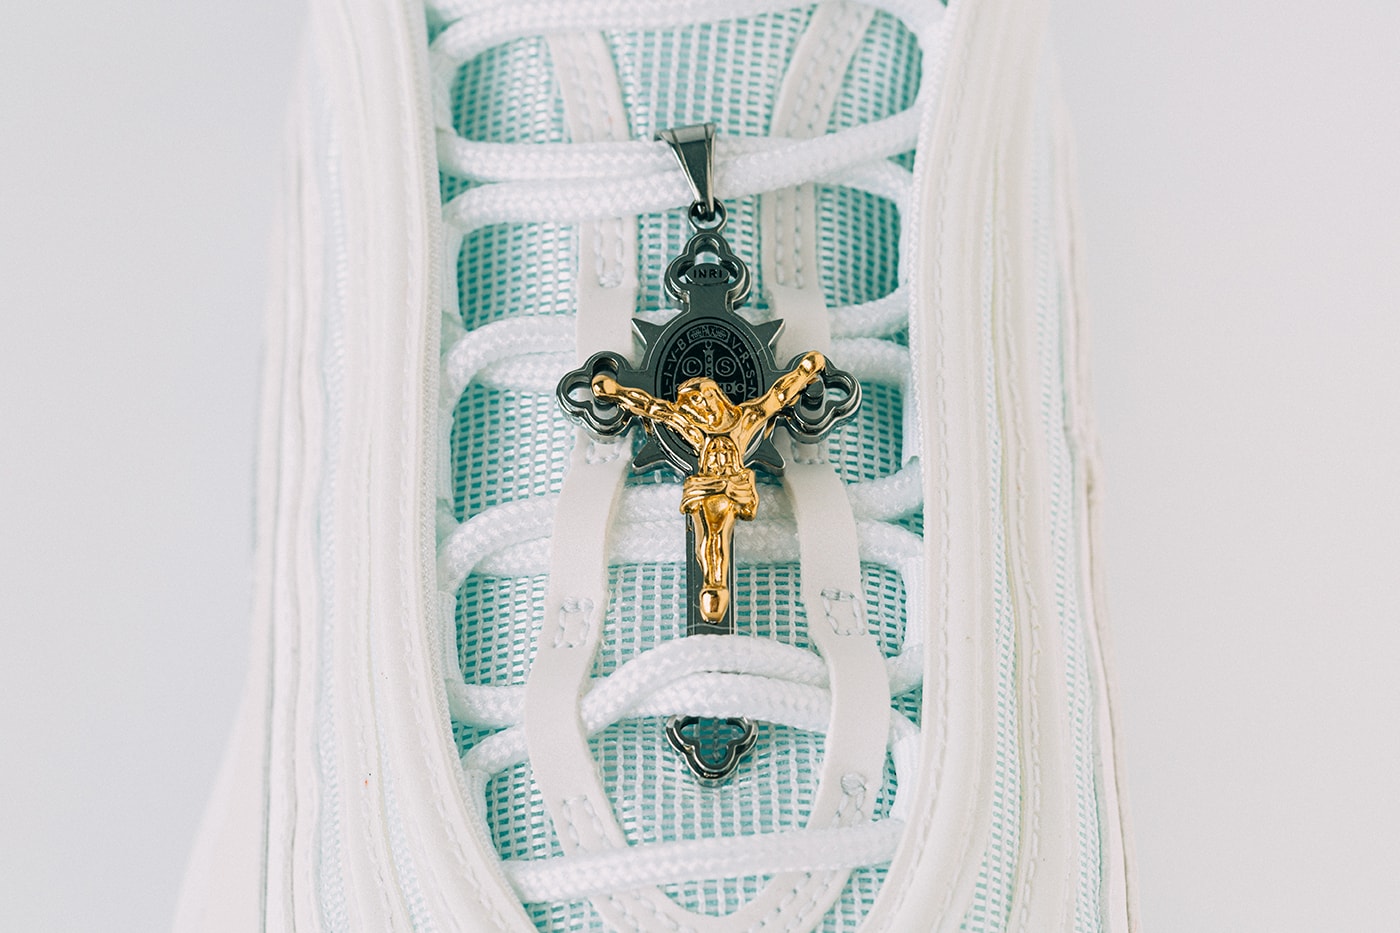 MSCHF x INRI Nike Air Max 97 "Jesus Shoes" Release Information Closer Look Walk on Water Biblical References Pope Crucifix Limited Edition How to Cop Buy Sneakers Footwear Customized Customs Rare